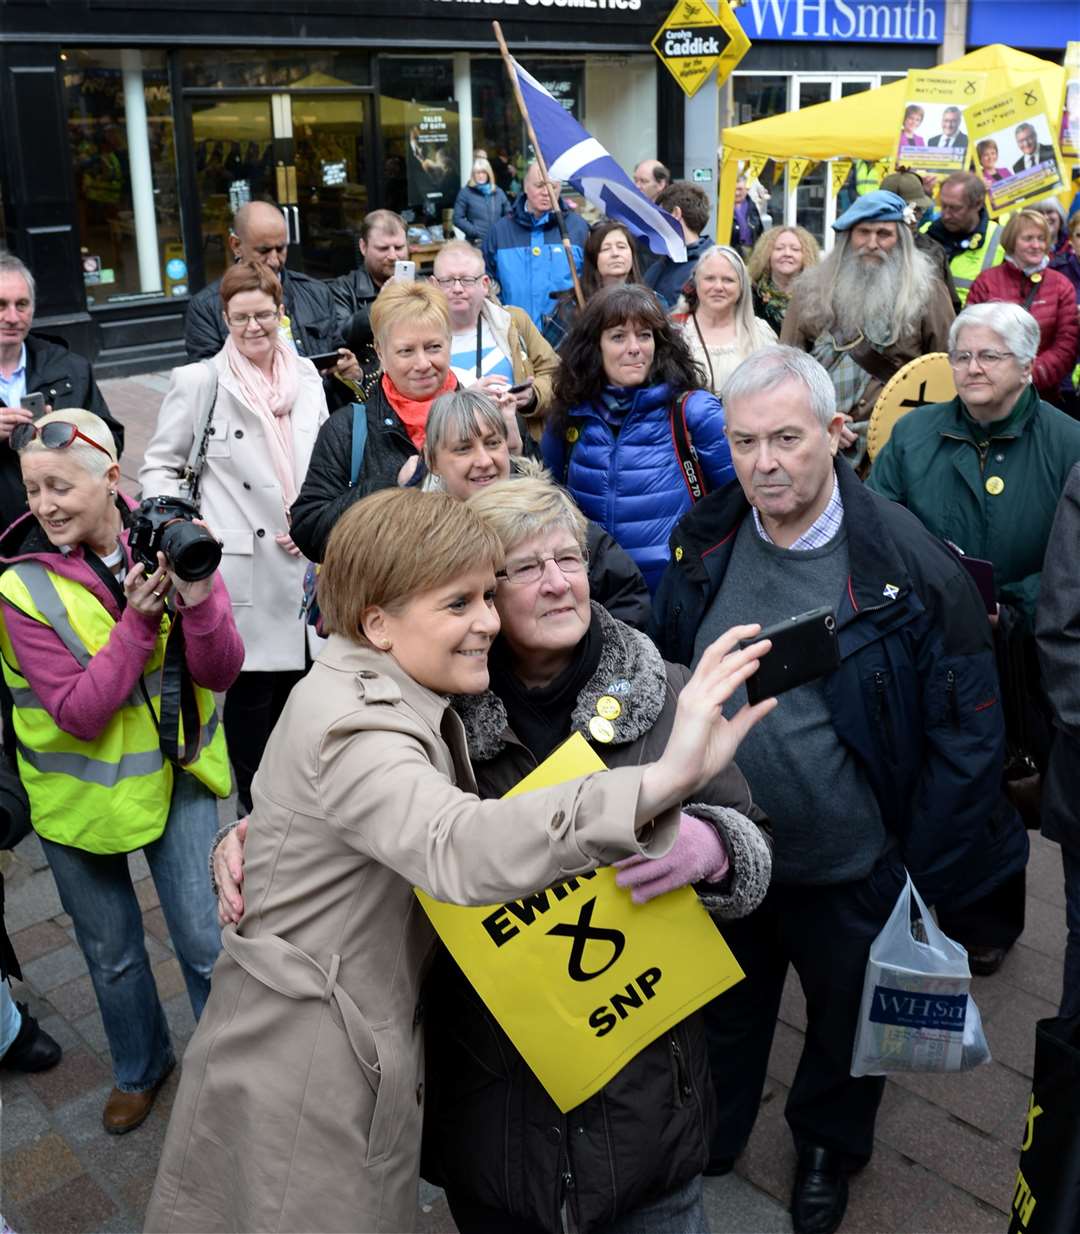 First Minister Nicola Sturgeon posing for selfies in Inverness High Street while on the electoral campaign trail. Picture: Gary Anthony. Image No.033268.